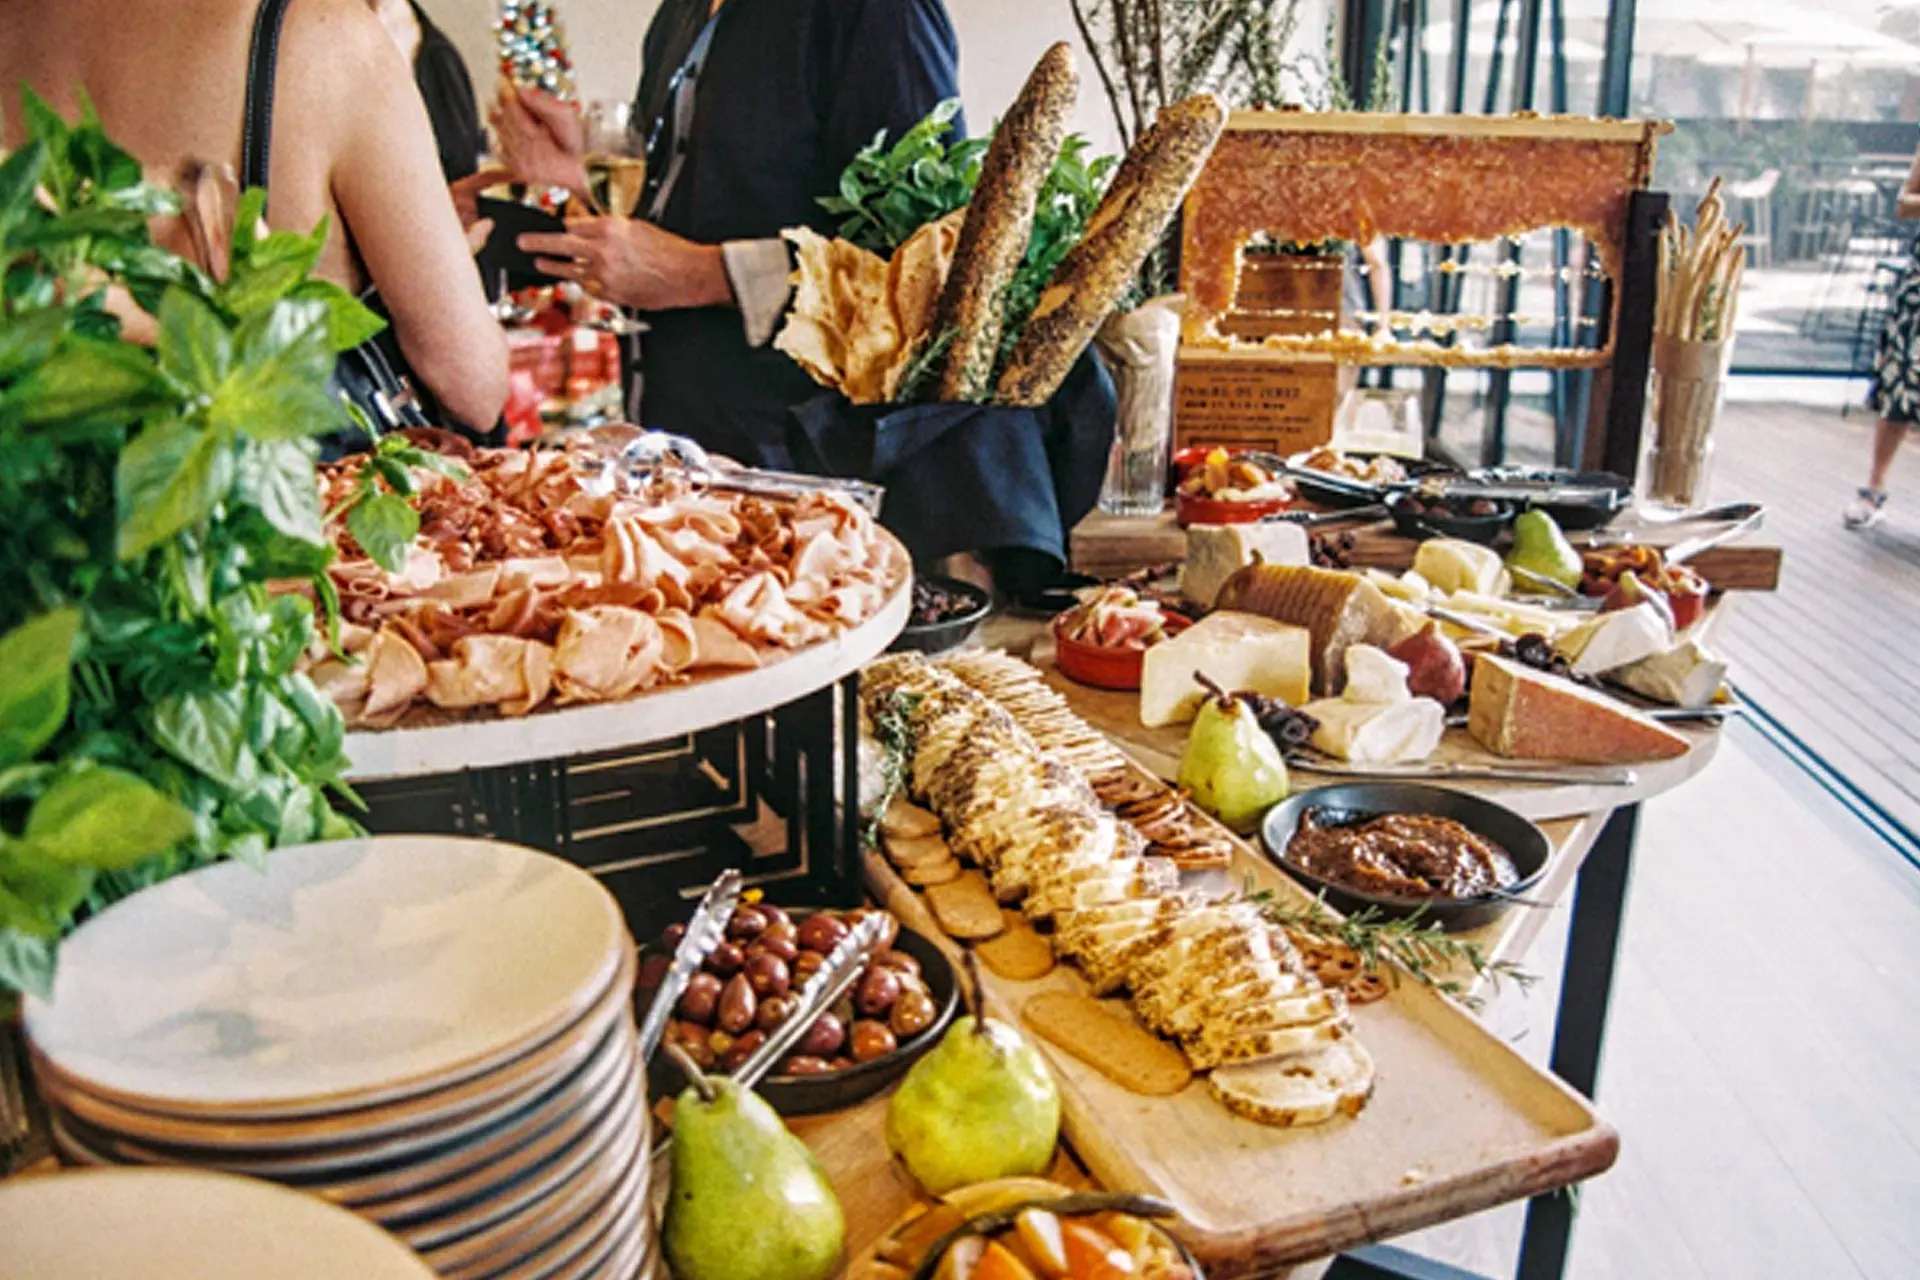 A catered table at an event